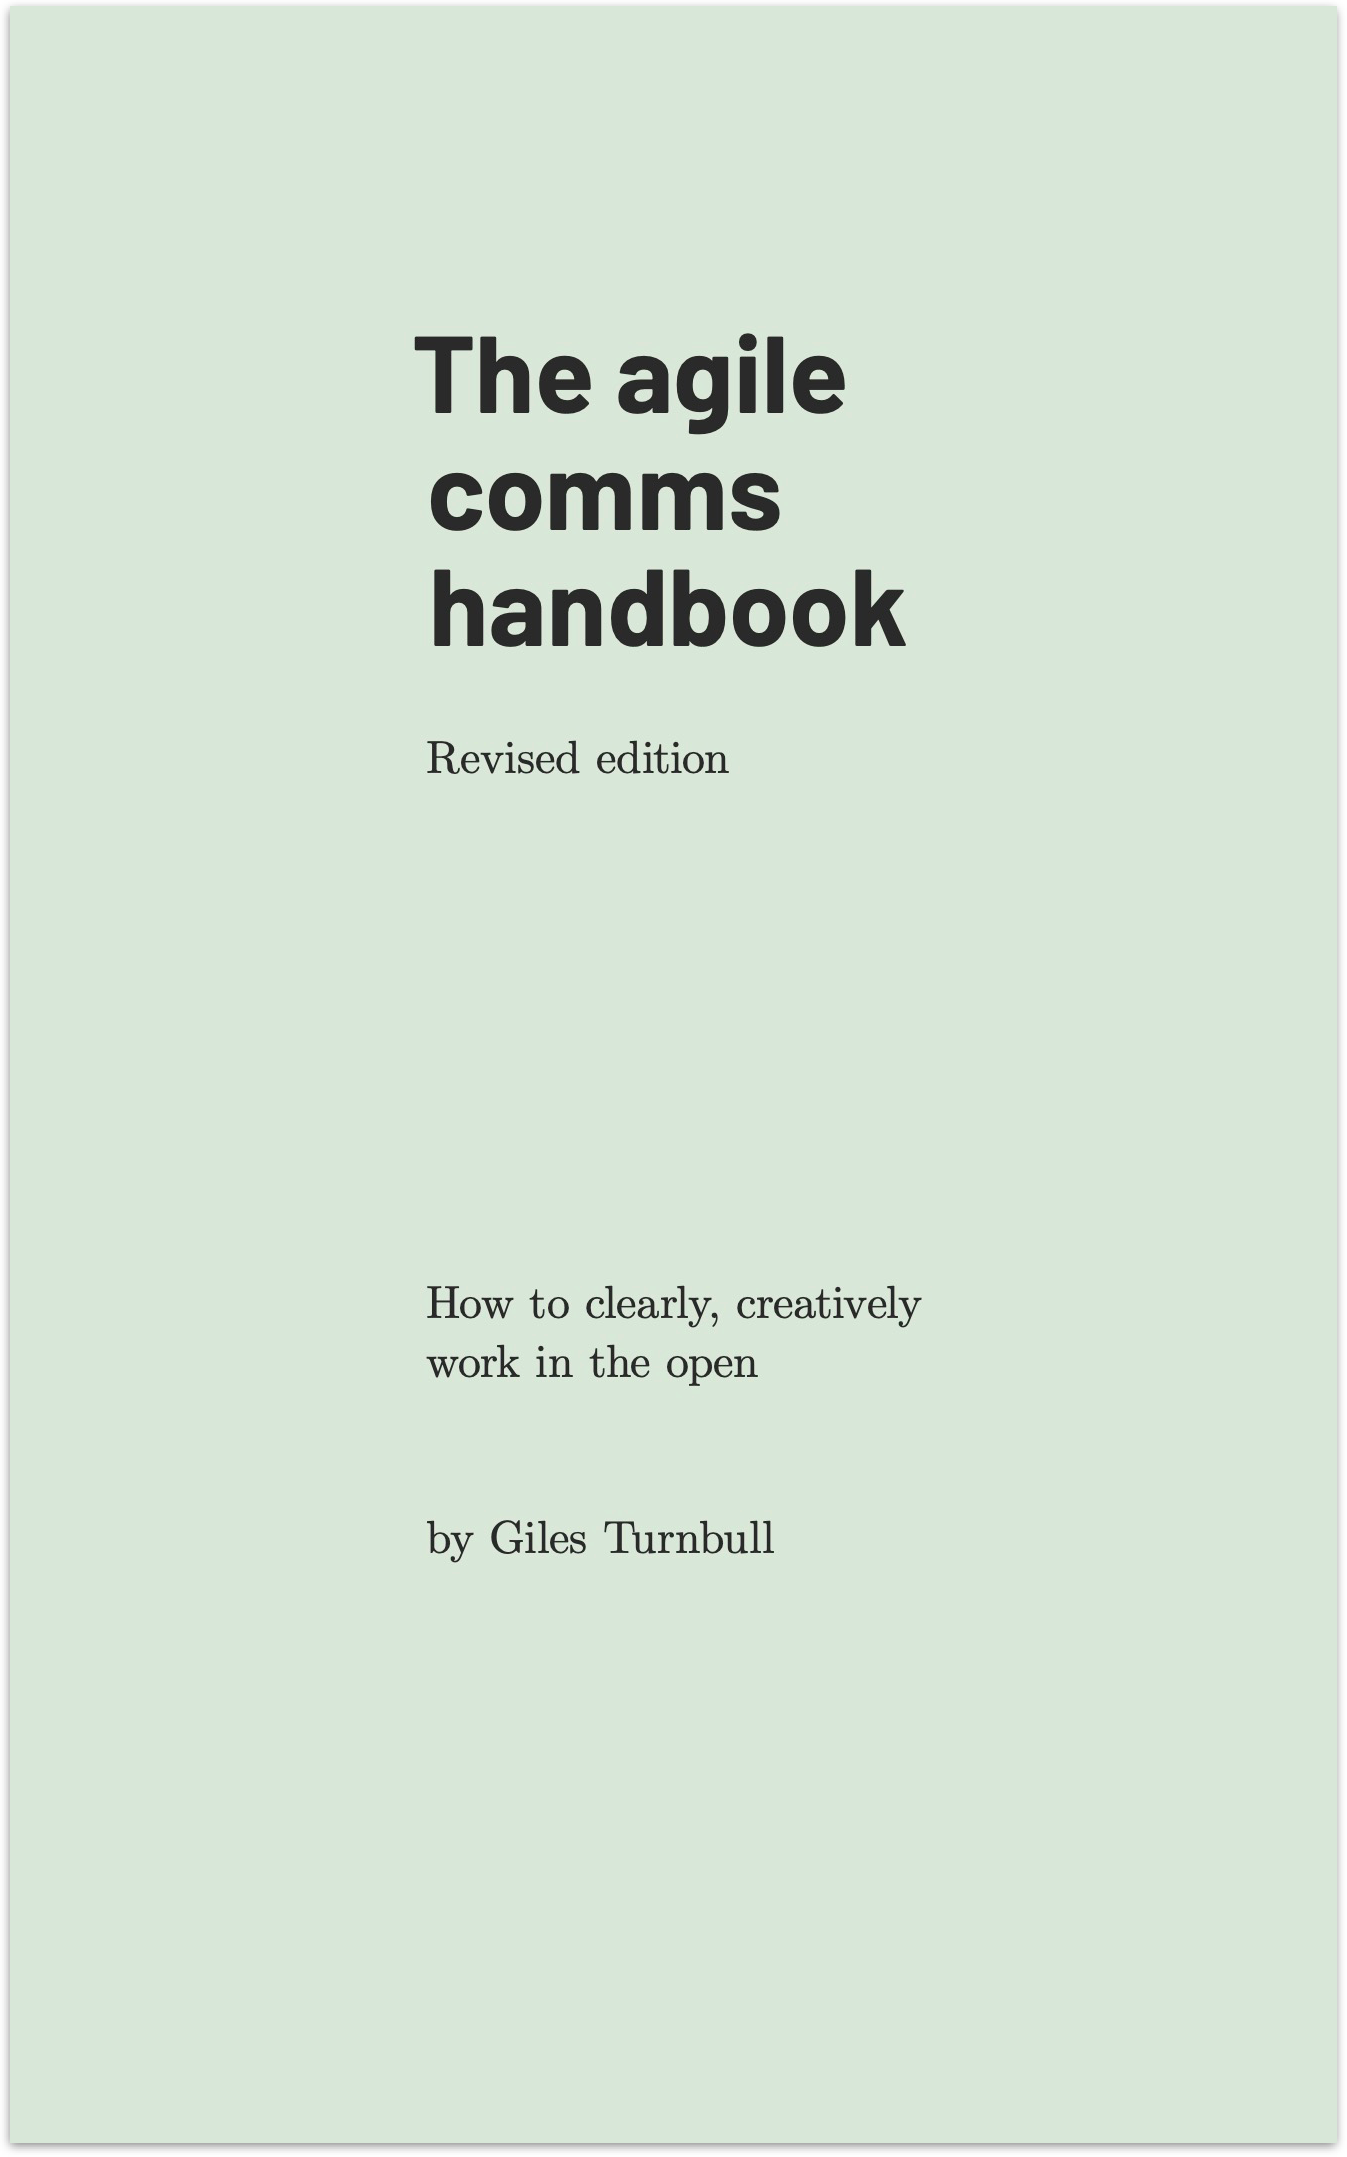 A photo of the front cover of the agile comms handbook by Giles Turnbull